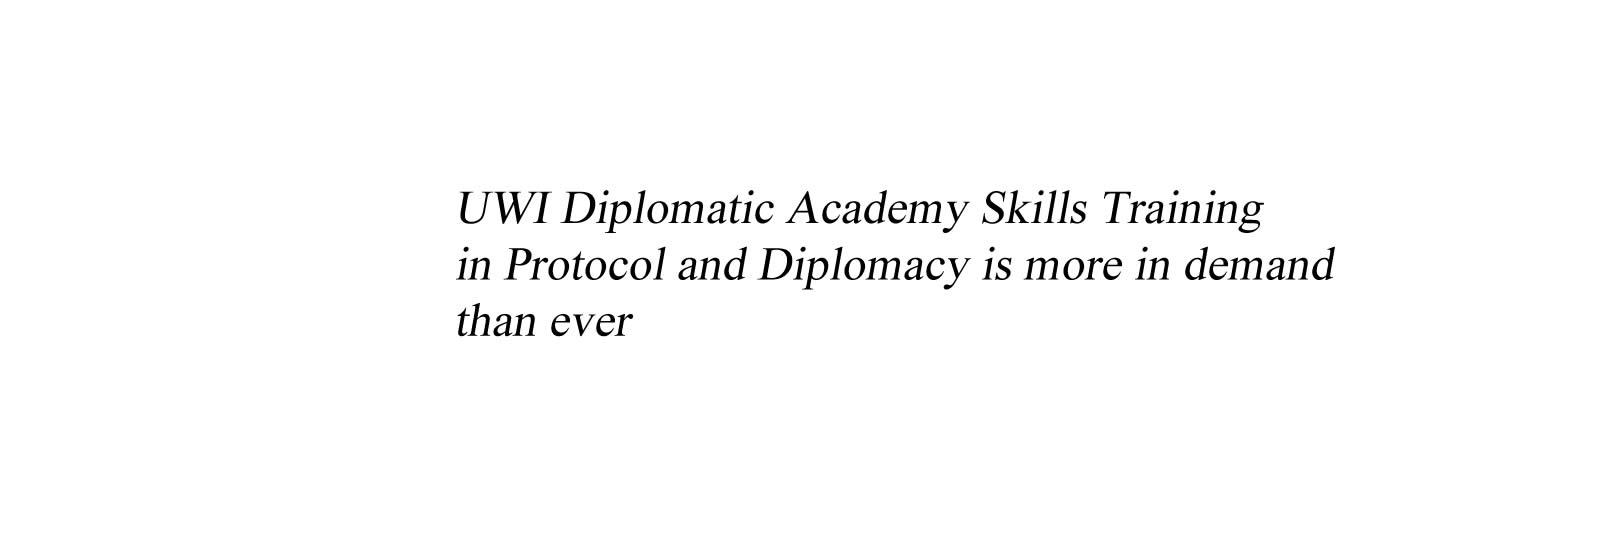 UWI Diplomatic Academy Skills Training in Protocol and Diplomacy is more in demand than ever